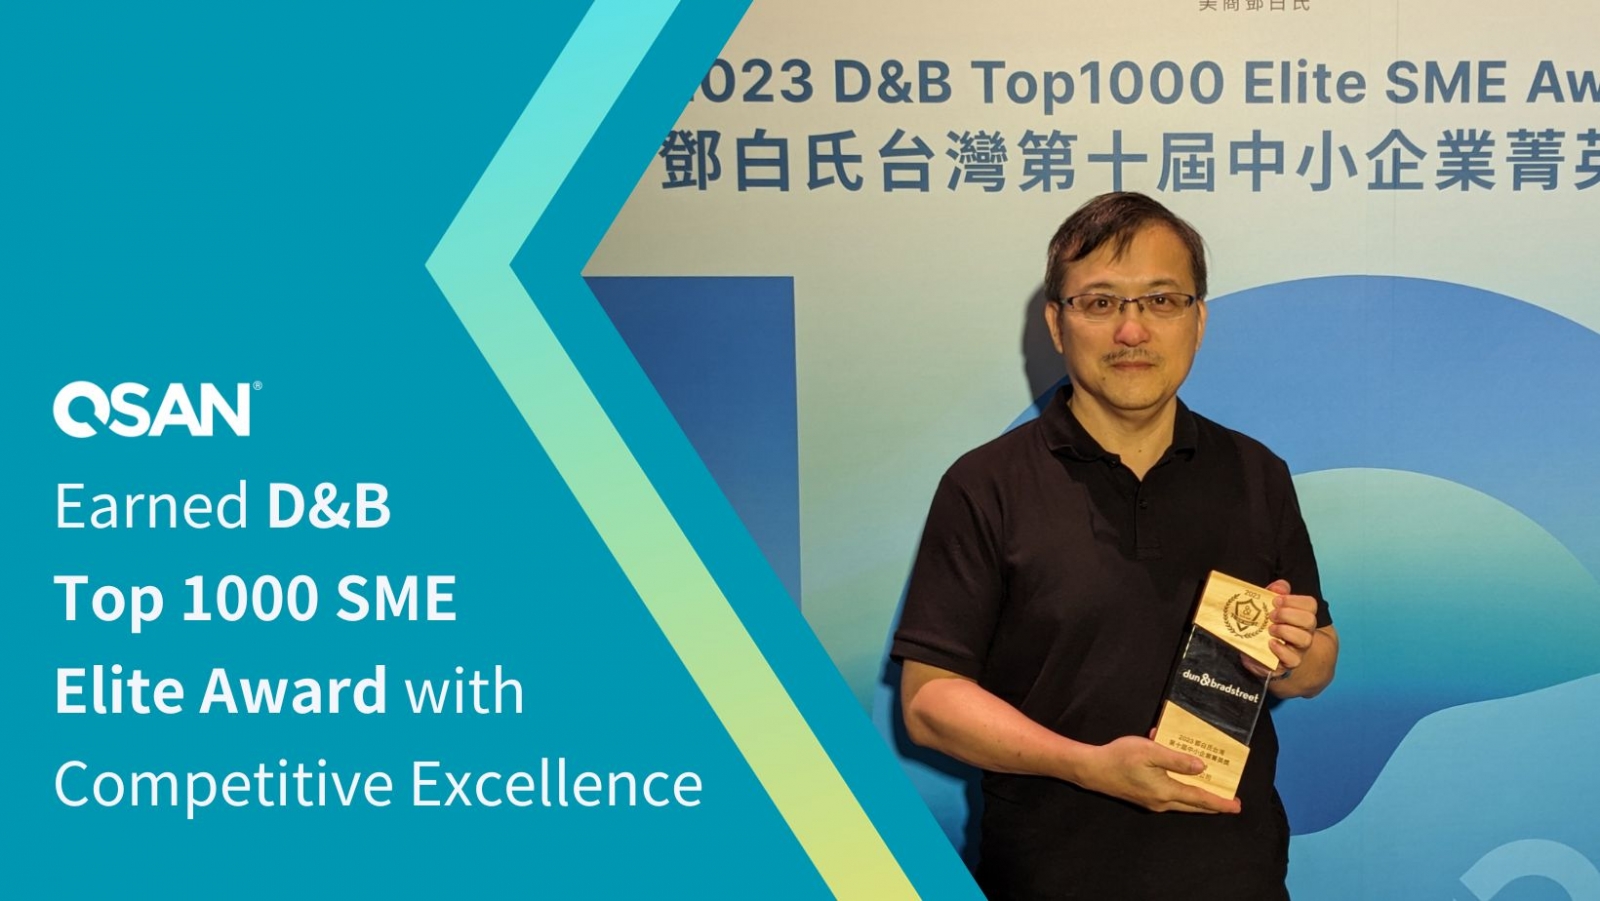 QSAN Earned D&B Top 1000 SME Elite Award with Competitive Excellence